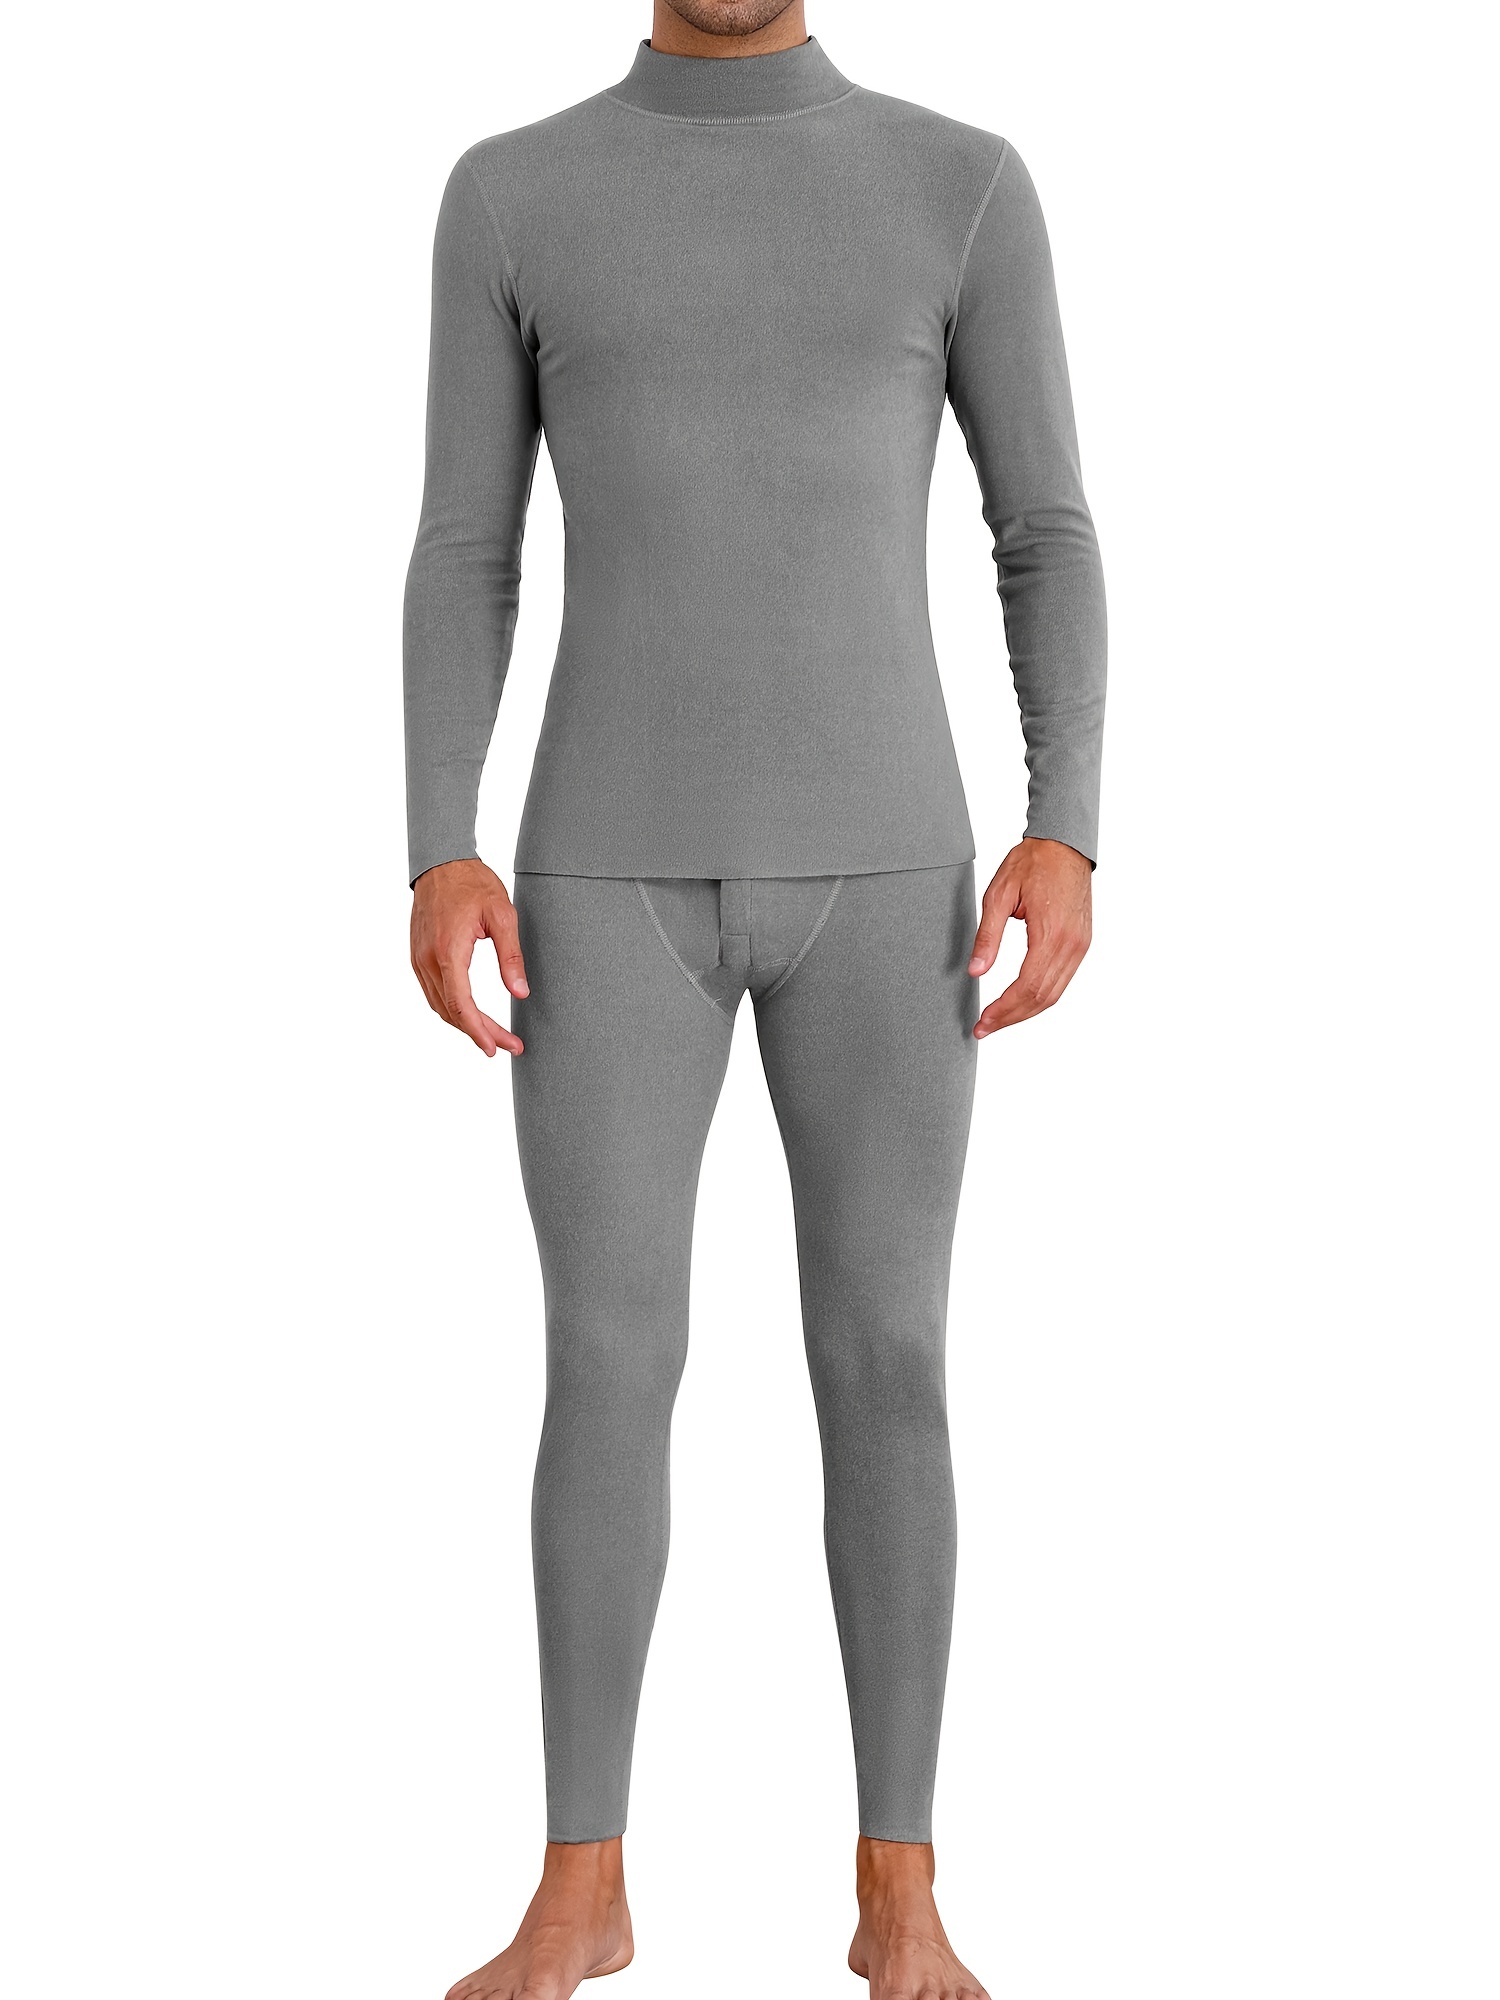 Electric Heated Thermal Underwear Set,Women Men USB Electric Heated Thermal  Long Sleeve T Shirts Ultra-Soft Base Layer